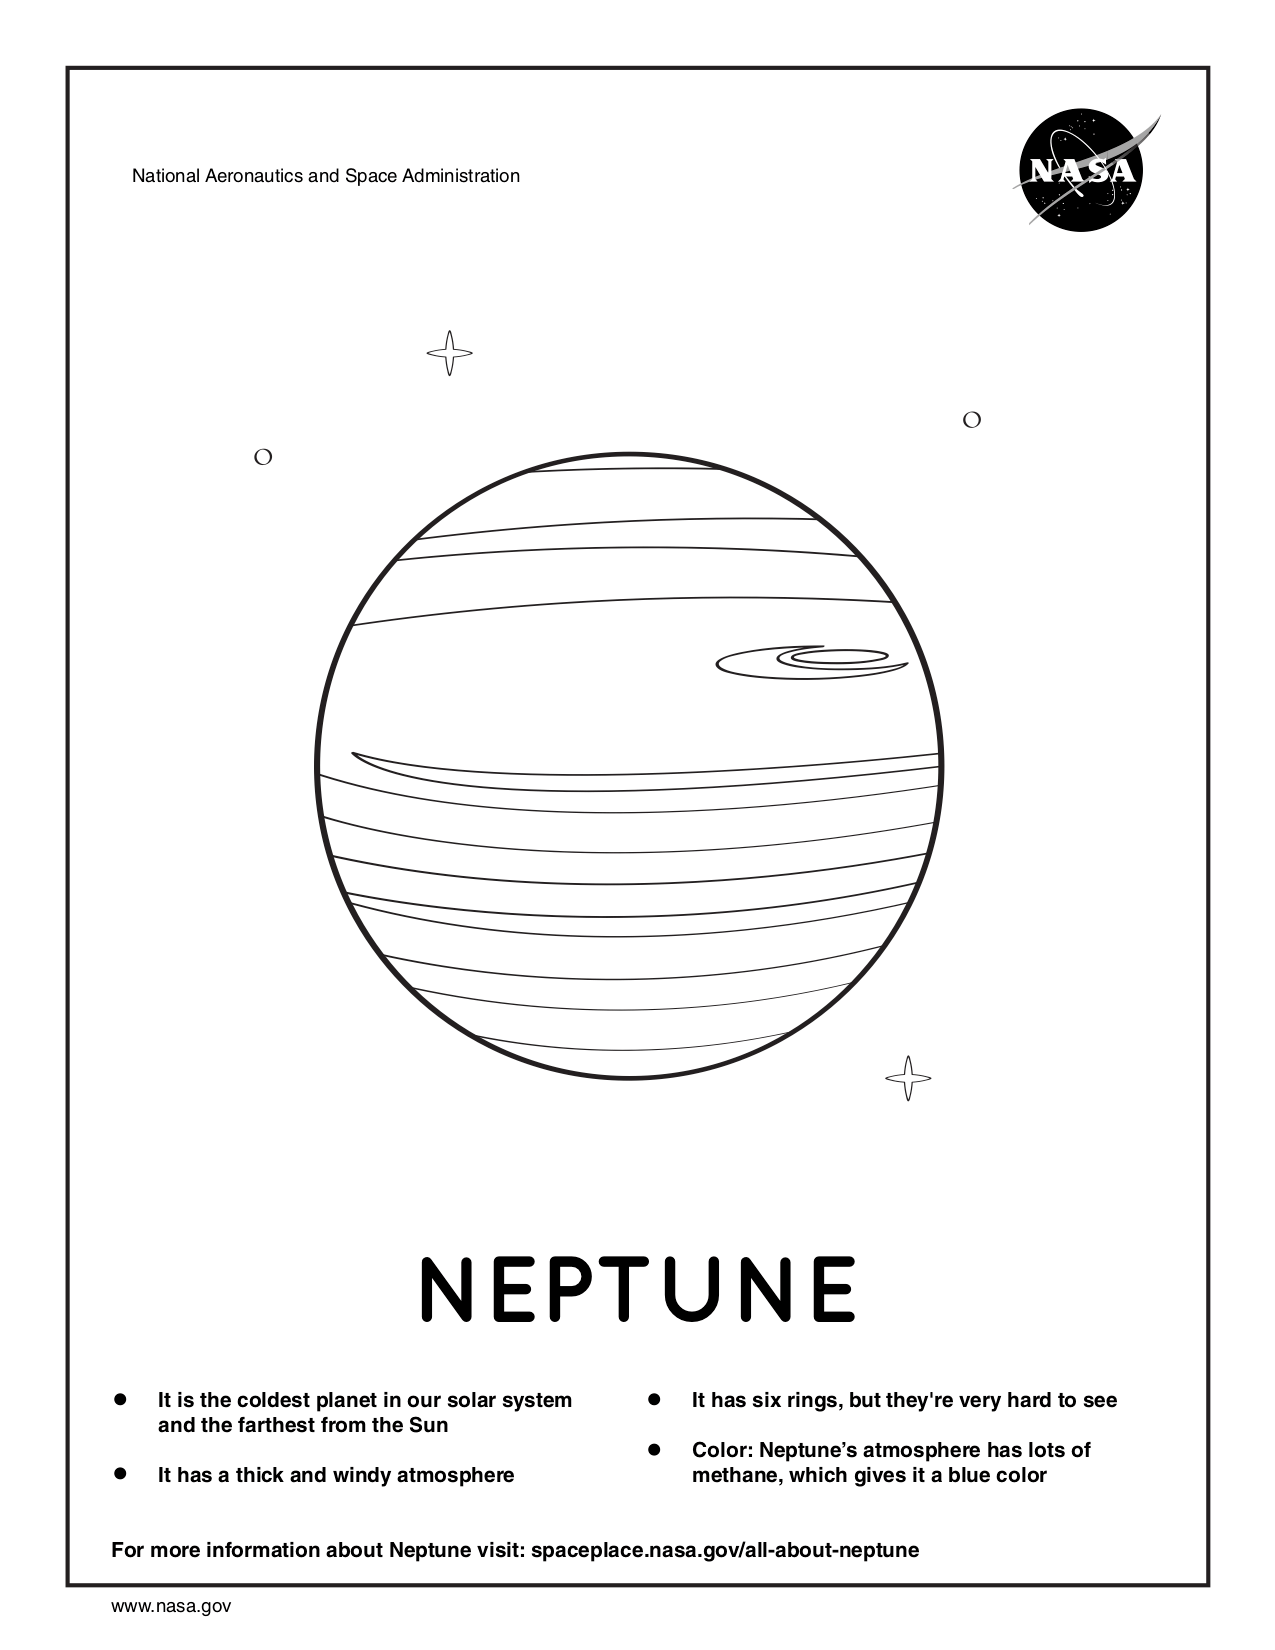 Coloring page for Neptune.